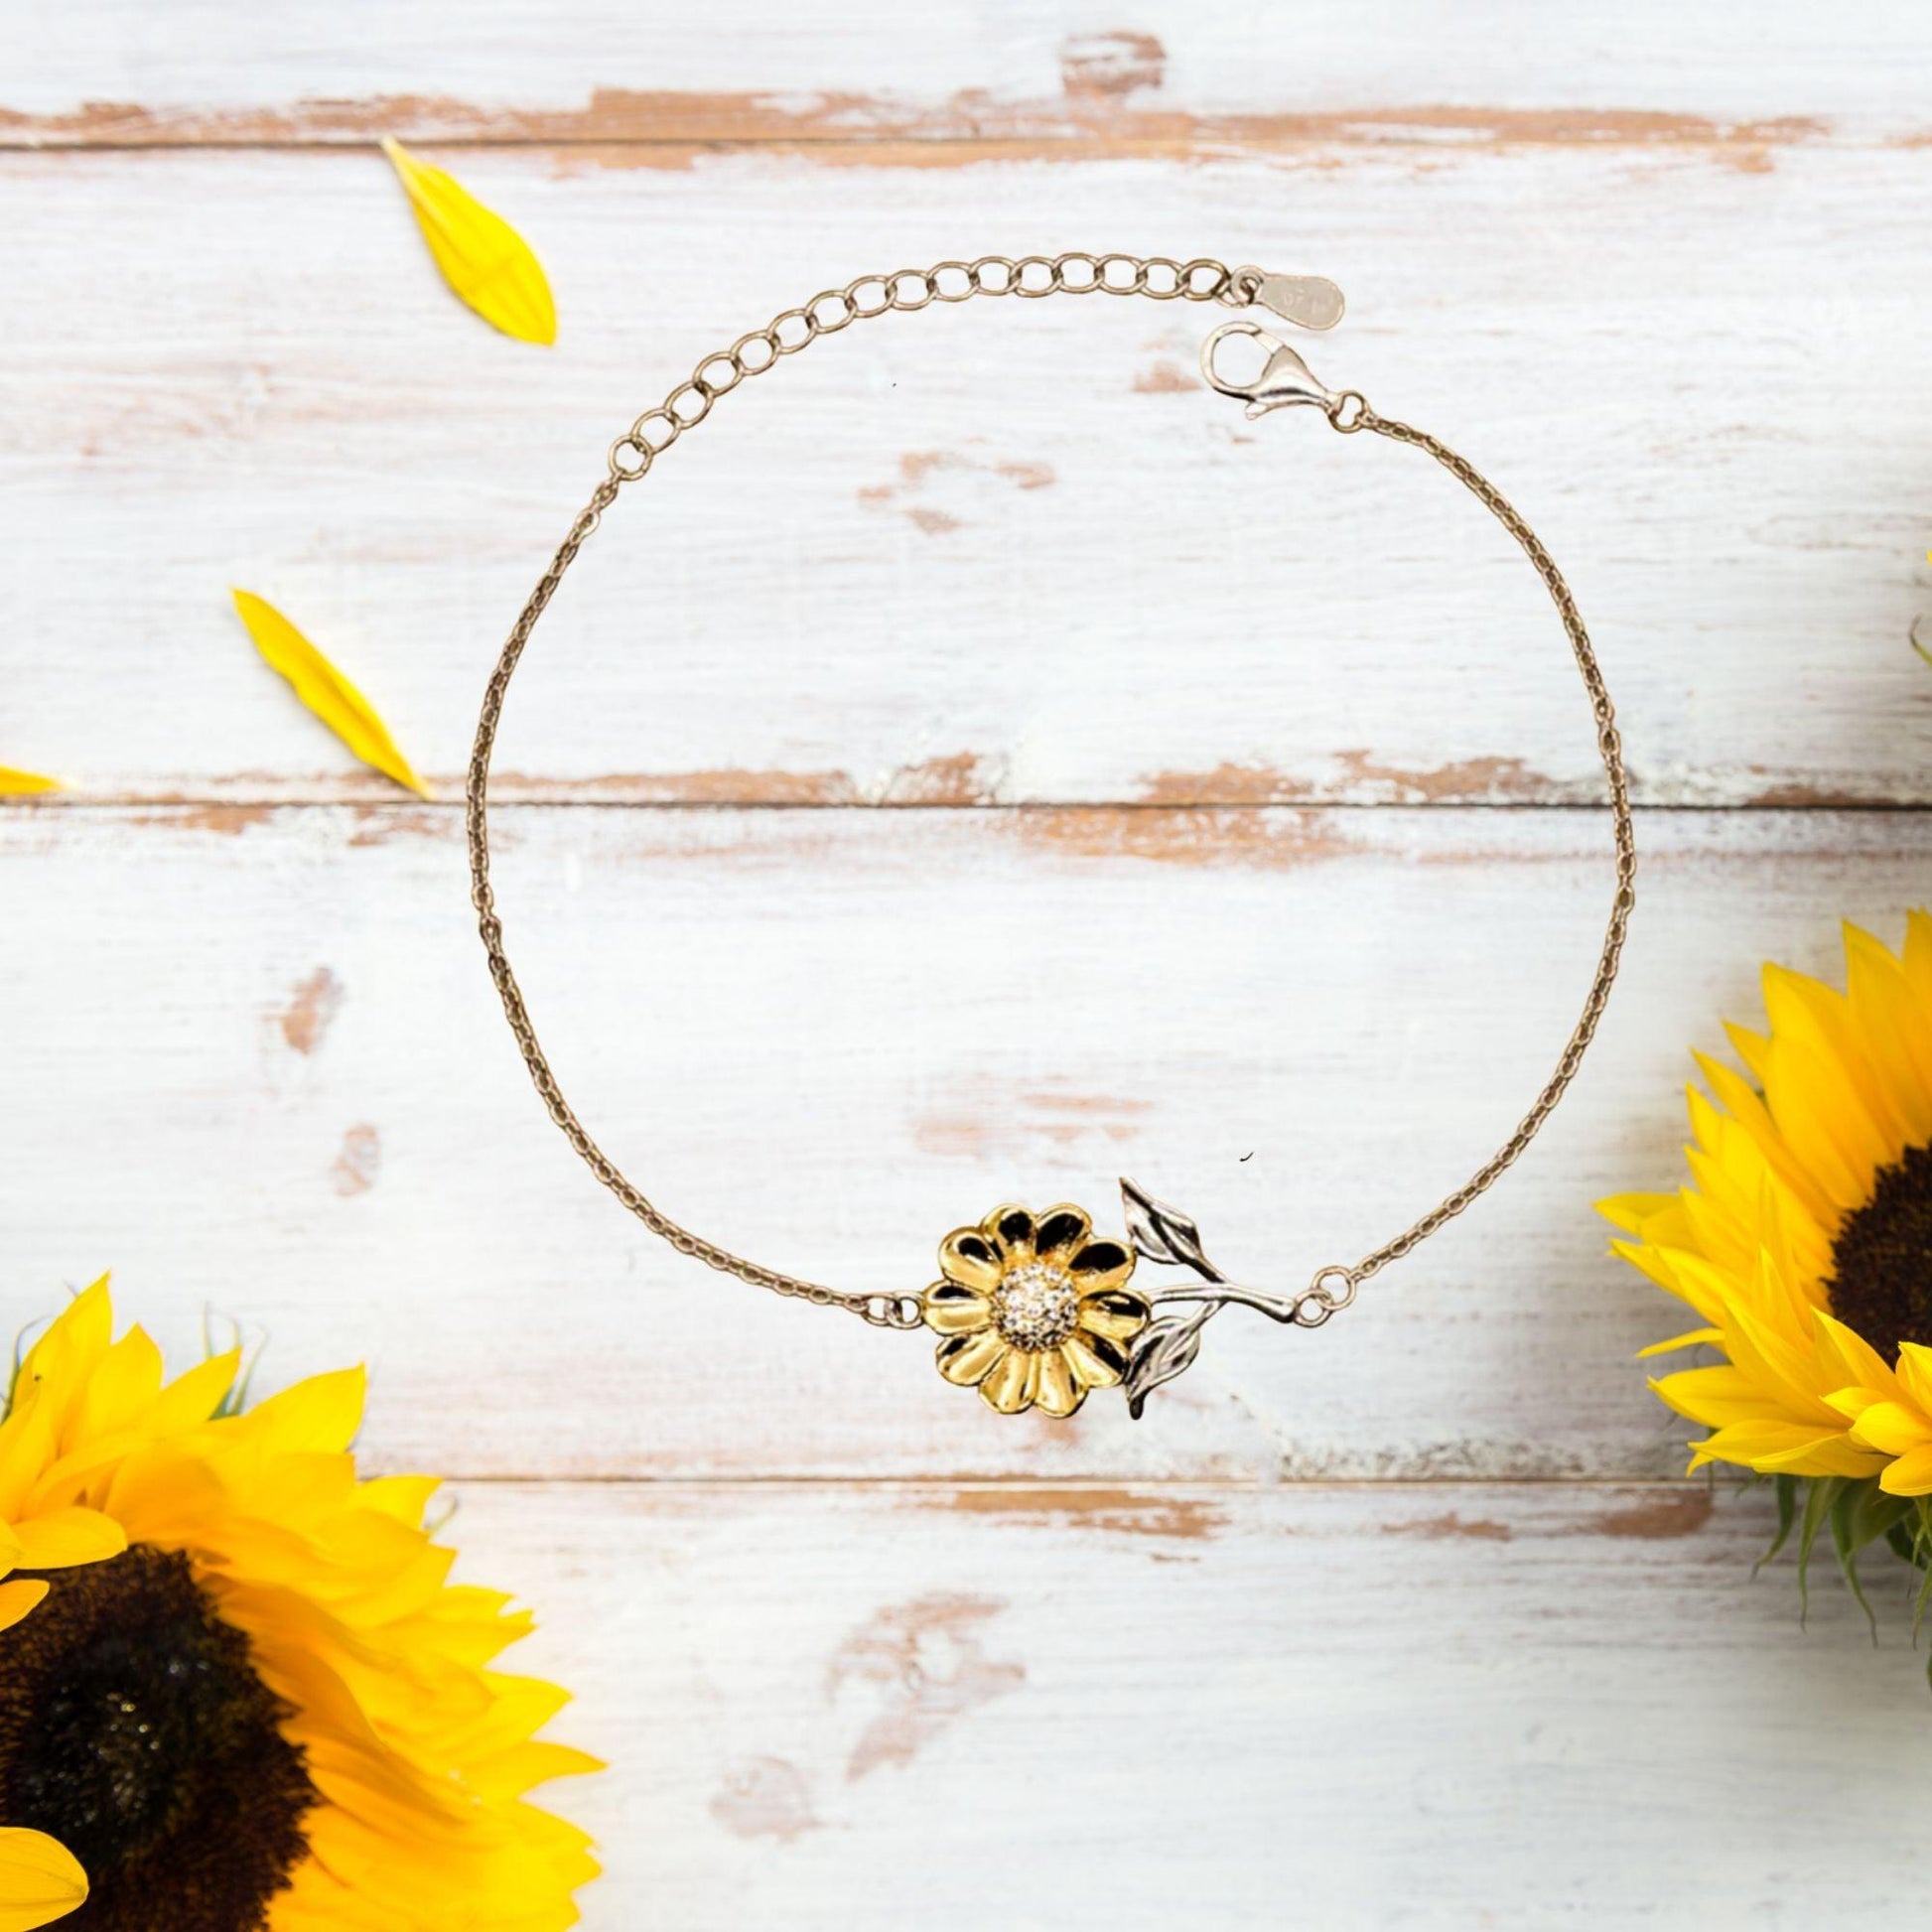 Payroll Clerk Sunflower Bracelet - Thanks for being who you are - Birthday Christmas Jewelry Gifts Coworkers Colleague Boss - Mallard Moon Gift Shop